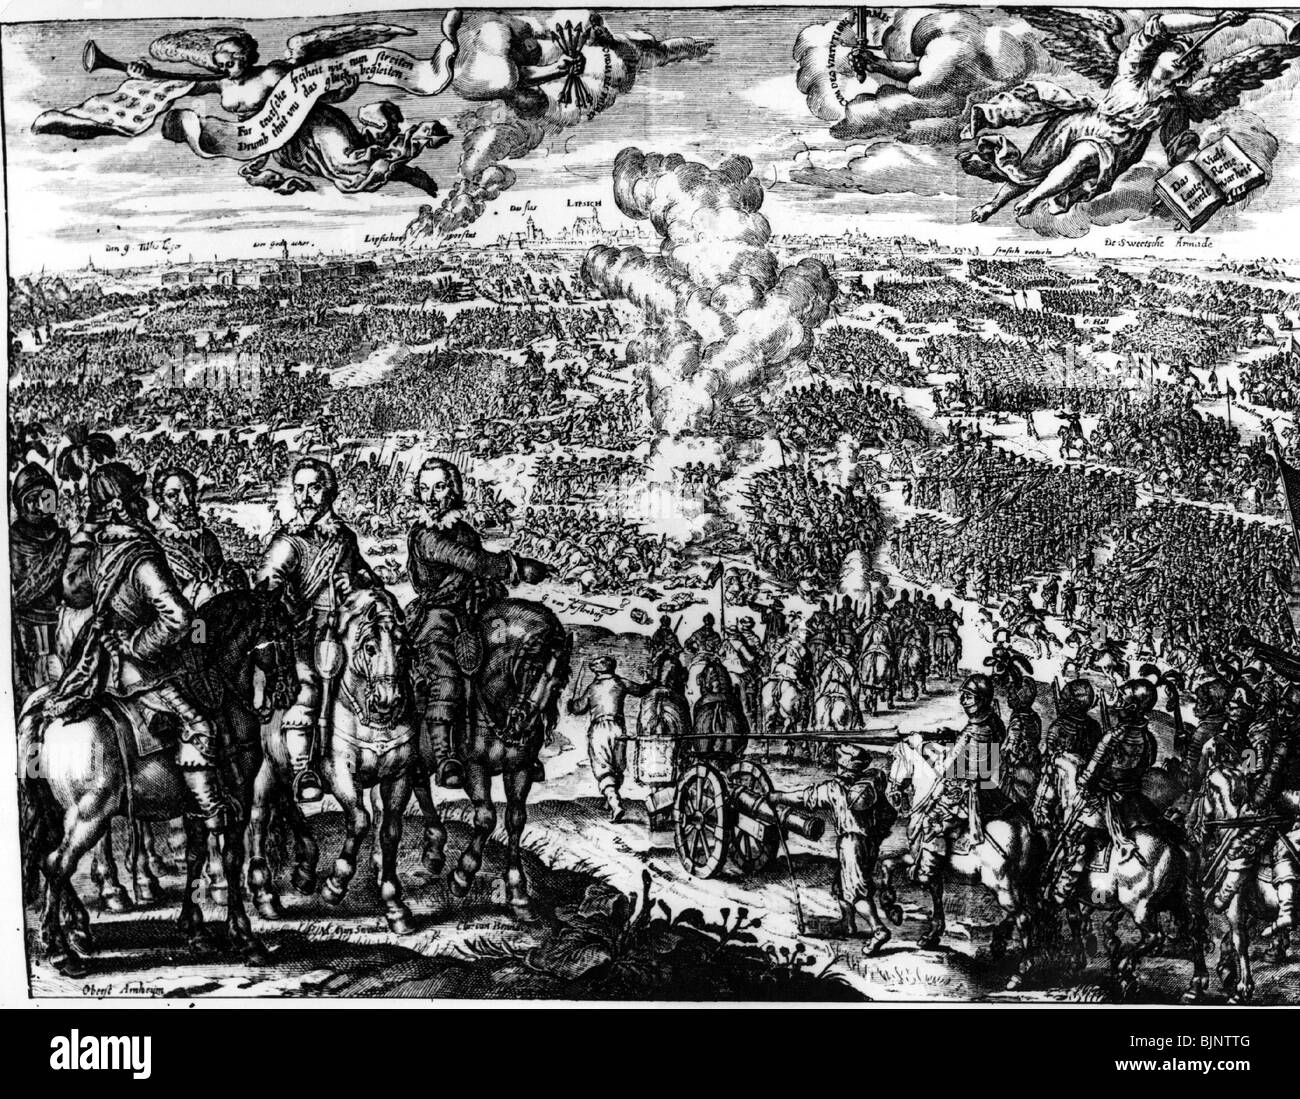 events, Thirty Years War 1618 - 1648, Swedish Intervention 1630 - 1635, First Battle of Breitenfeld 17.9.1631, King Gustavus Adolphus and his staff, contemporary copper engraving, Sweden, Germany, religious war, soldiers, cavalry, infantry, artillery, Protestants, angel, 17th century, historic, historical, people, Stock Photo